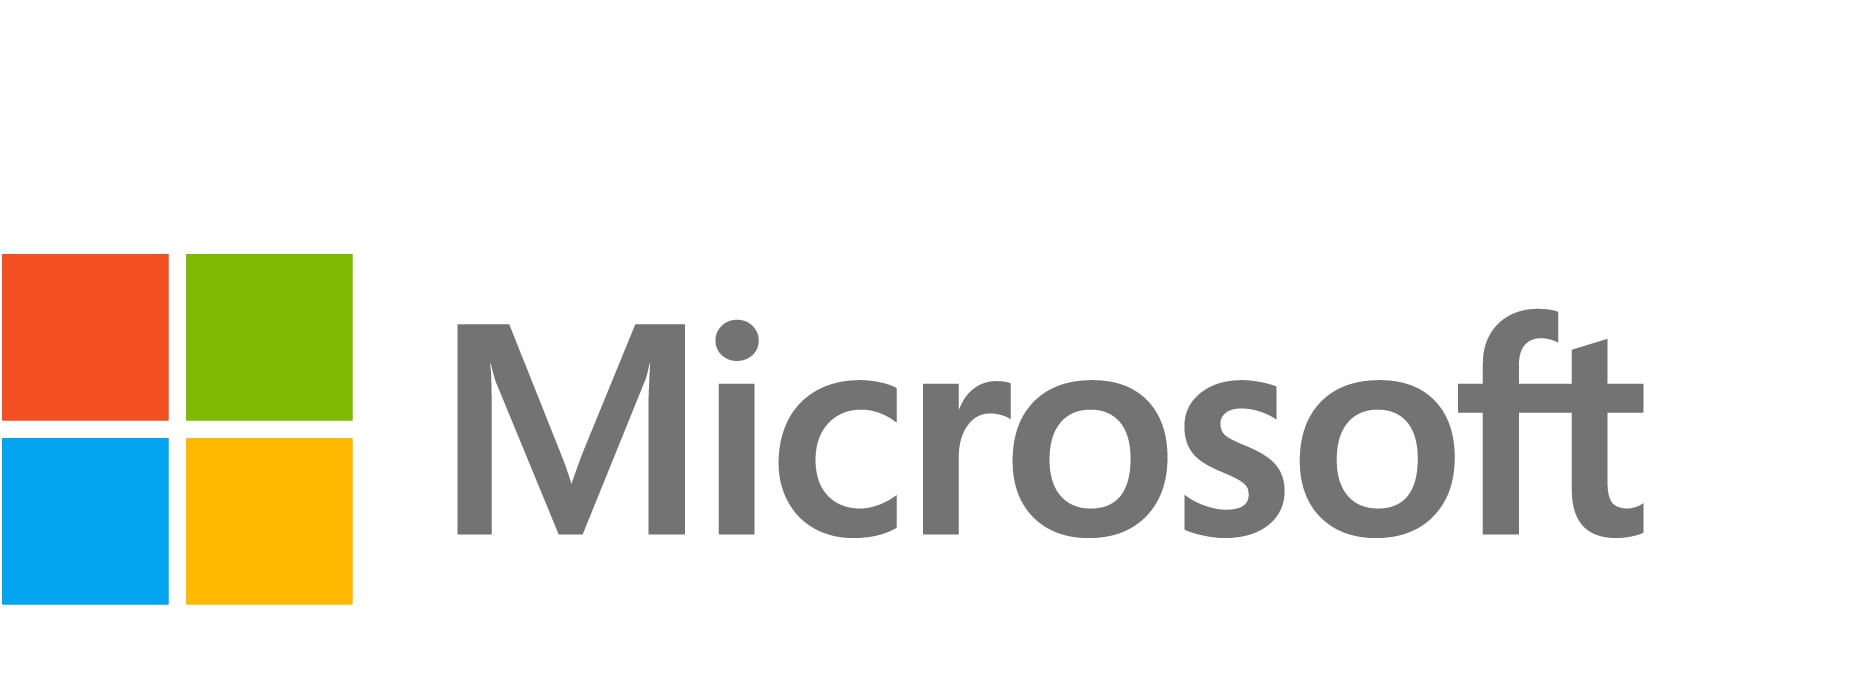 Microsoft System Center Operations Manager Client Management License - license & software assurance - 1 user